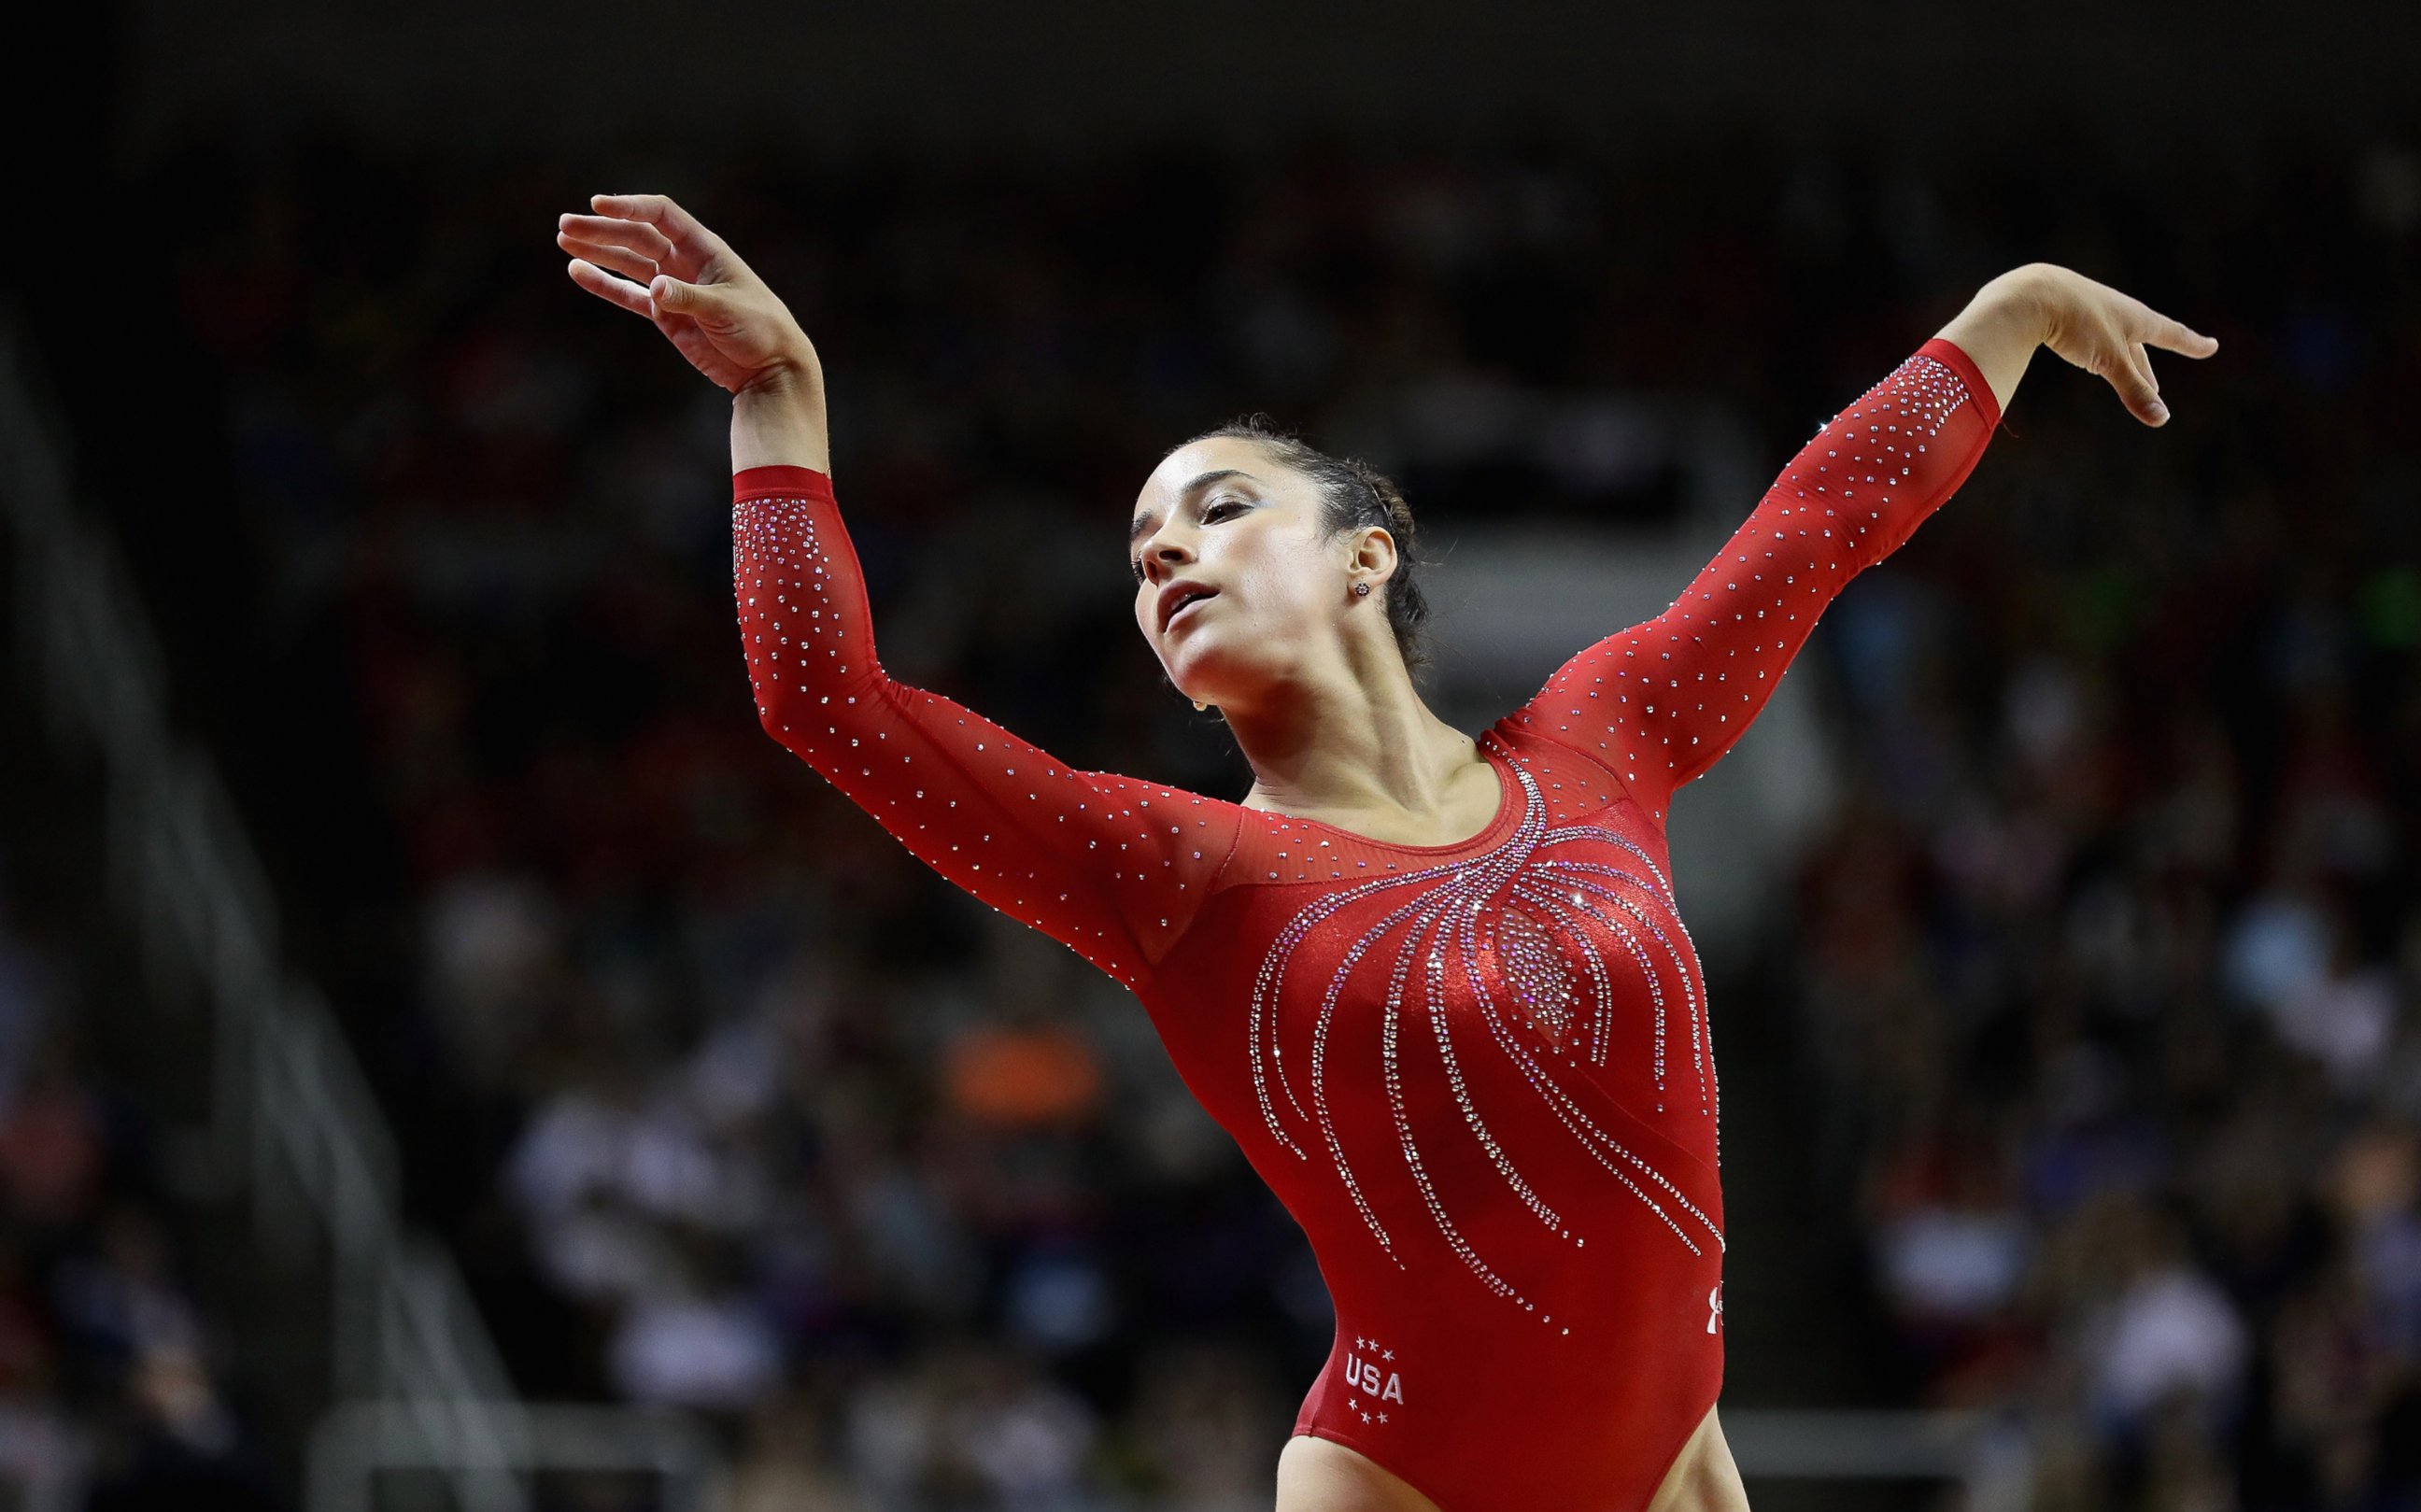 PHOTO: Alexandra Raisman competes in the floor exercise during Day 2 of the 2016 U.S. Women's Gymnastics Olympic Trials at SAP Center, July 10, 2016 in San Jose, California.